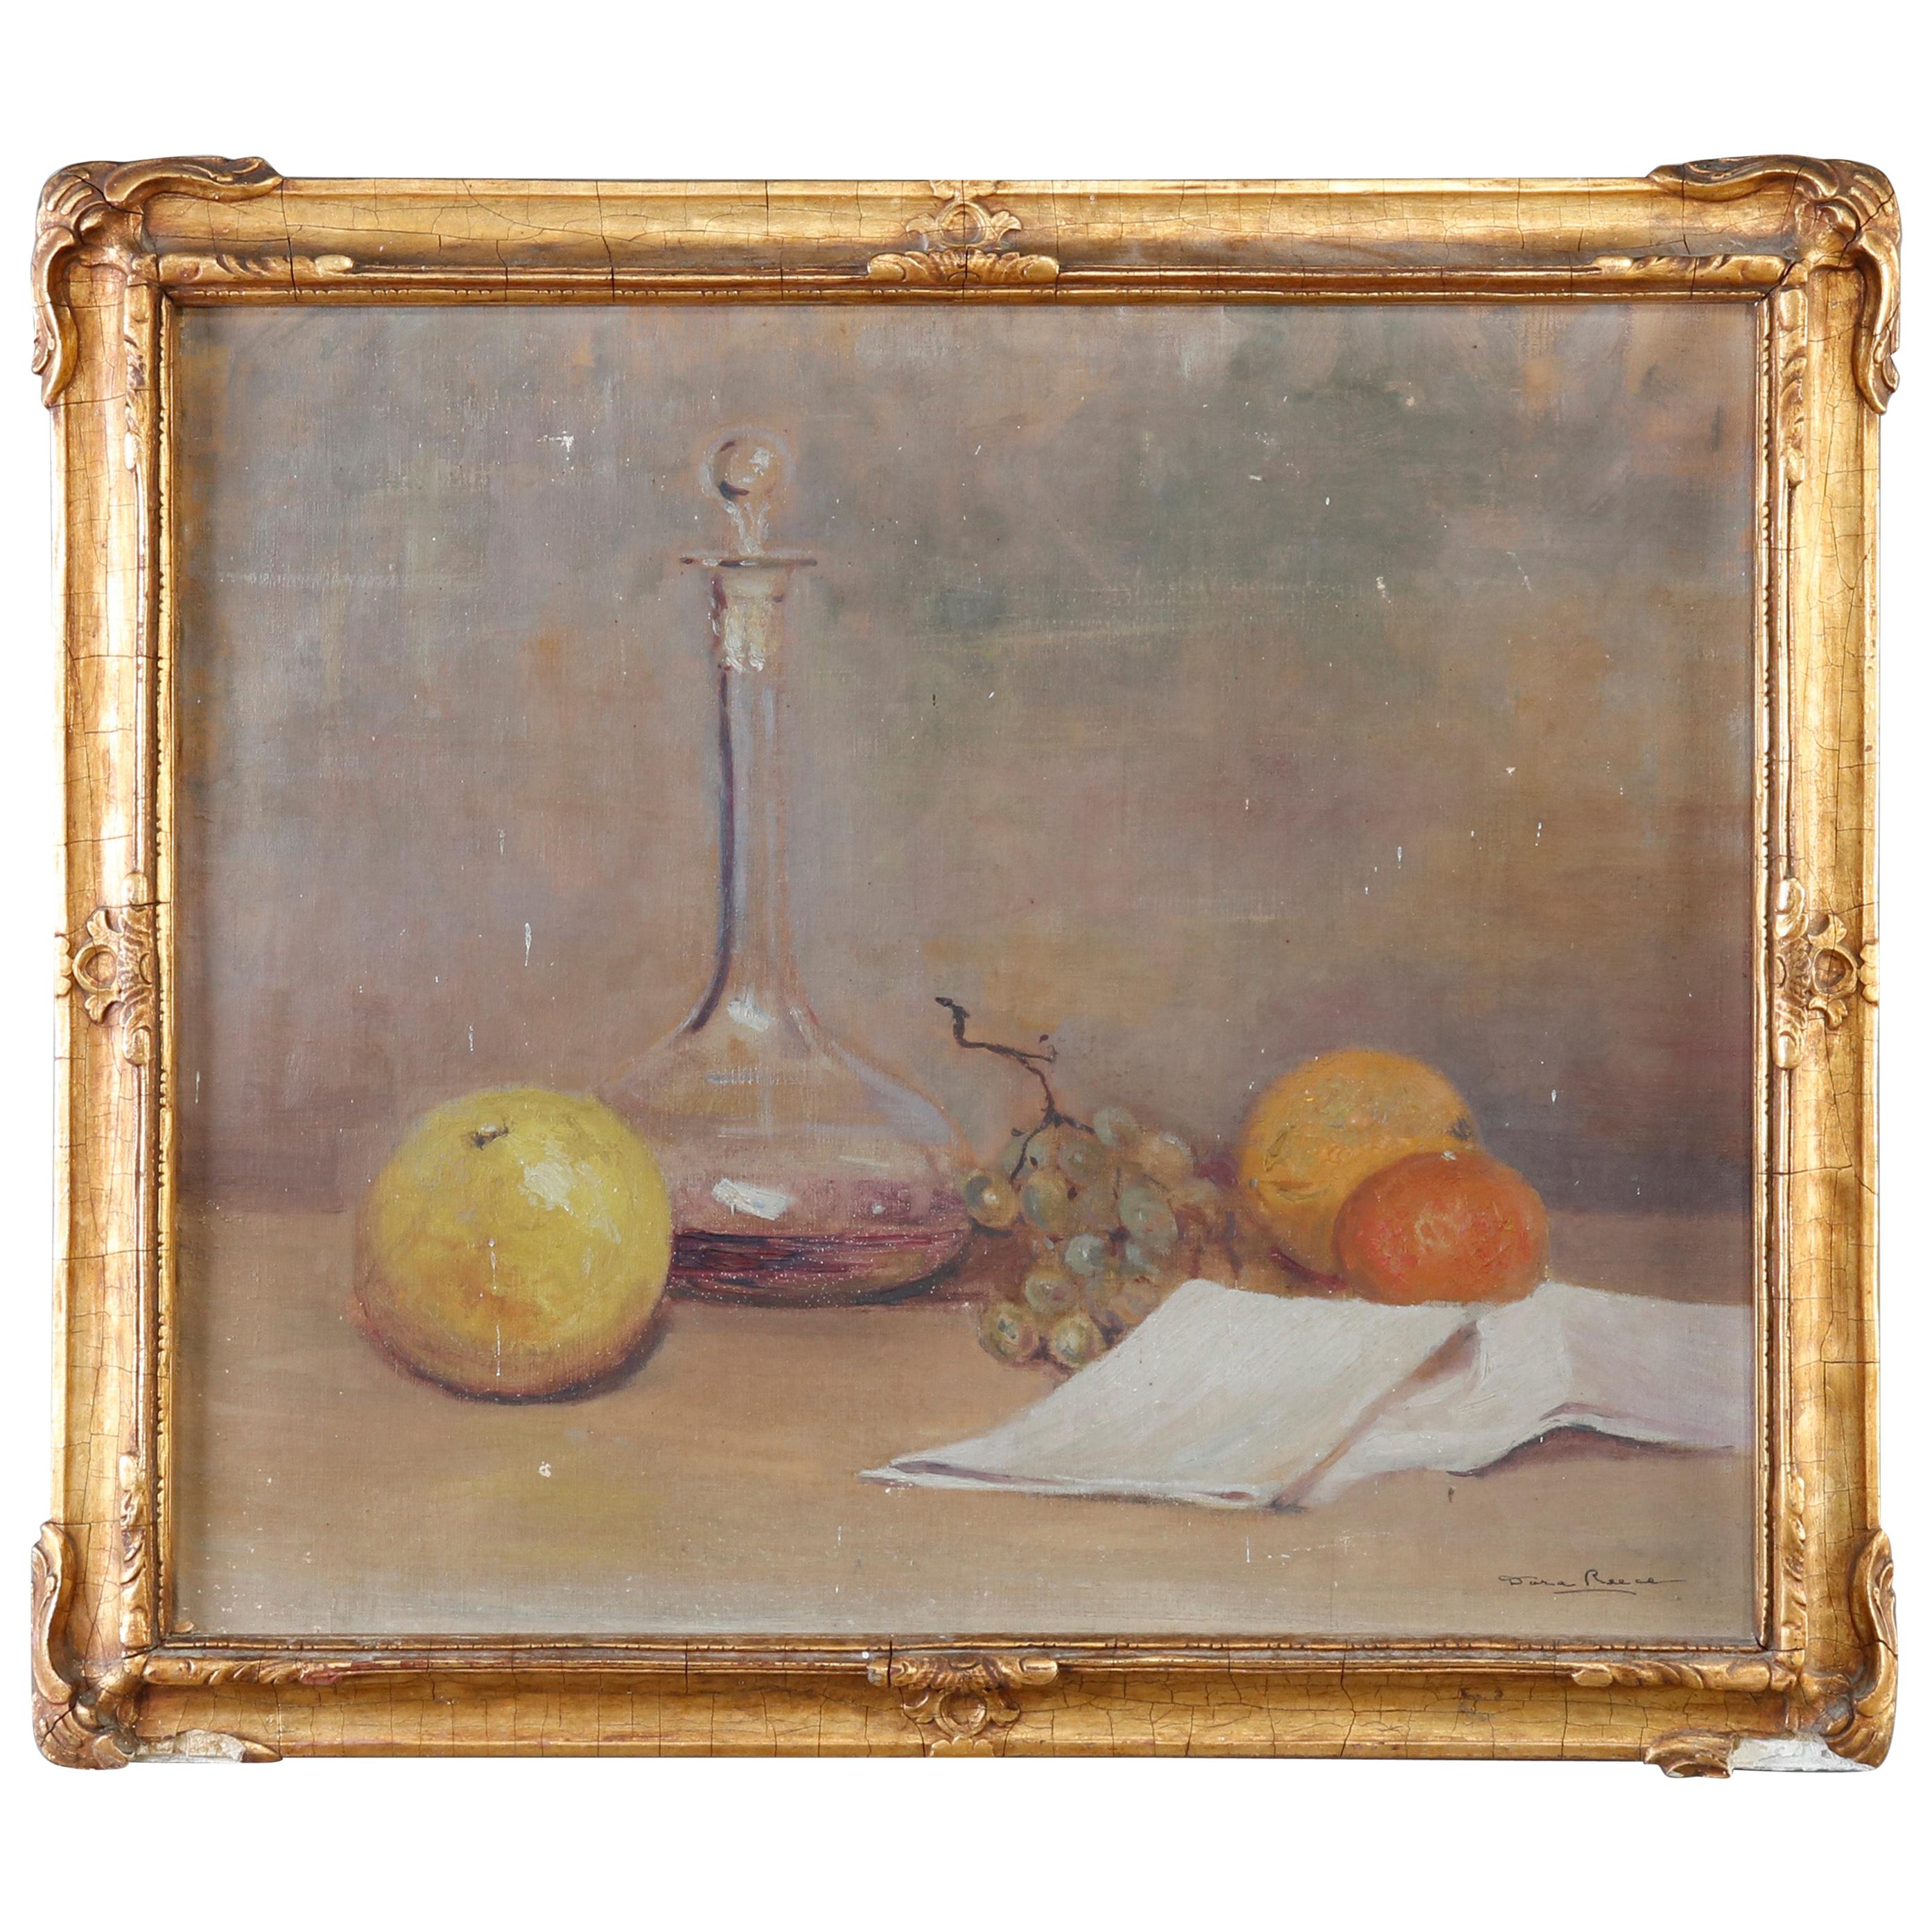 Antique Oil on Canvas Fruit Still Life by Dora Reese, Giltwood Framed, 19th C